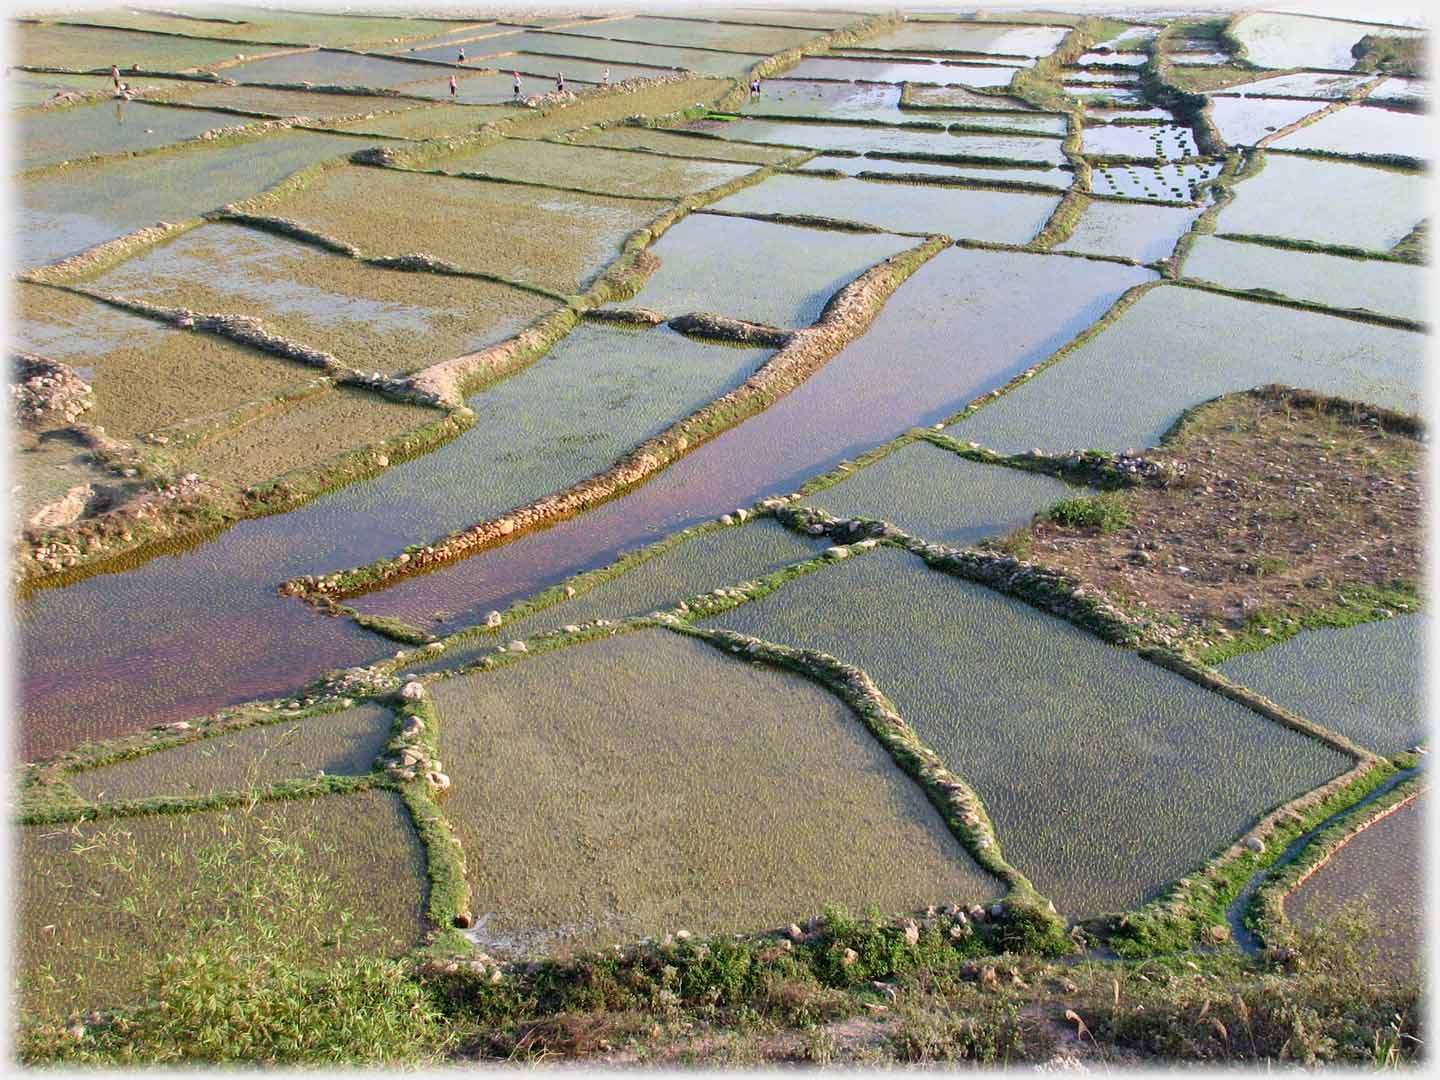 Wide view of water filled fields, ten small figures in the distance.